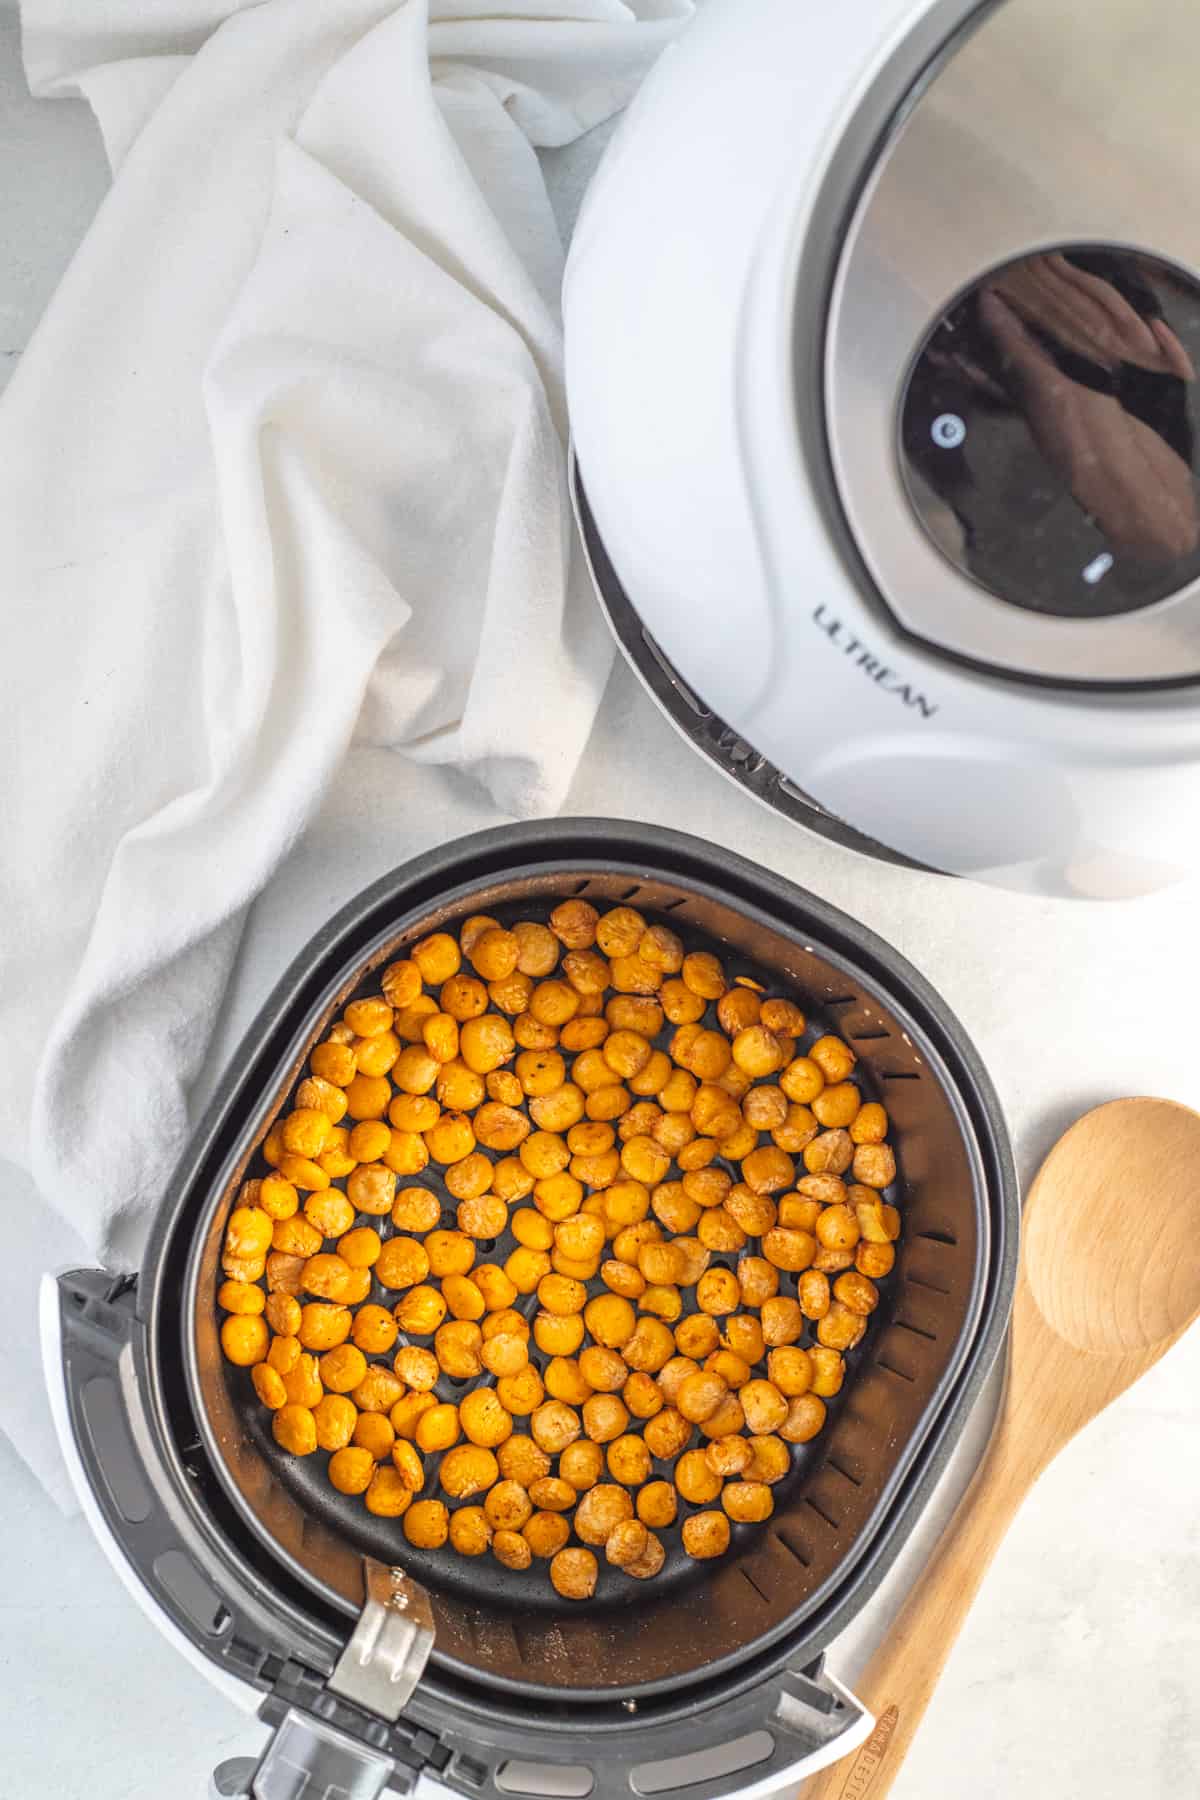 Cooked Beans in the Air Fryer